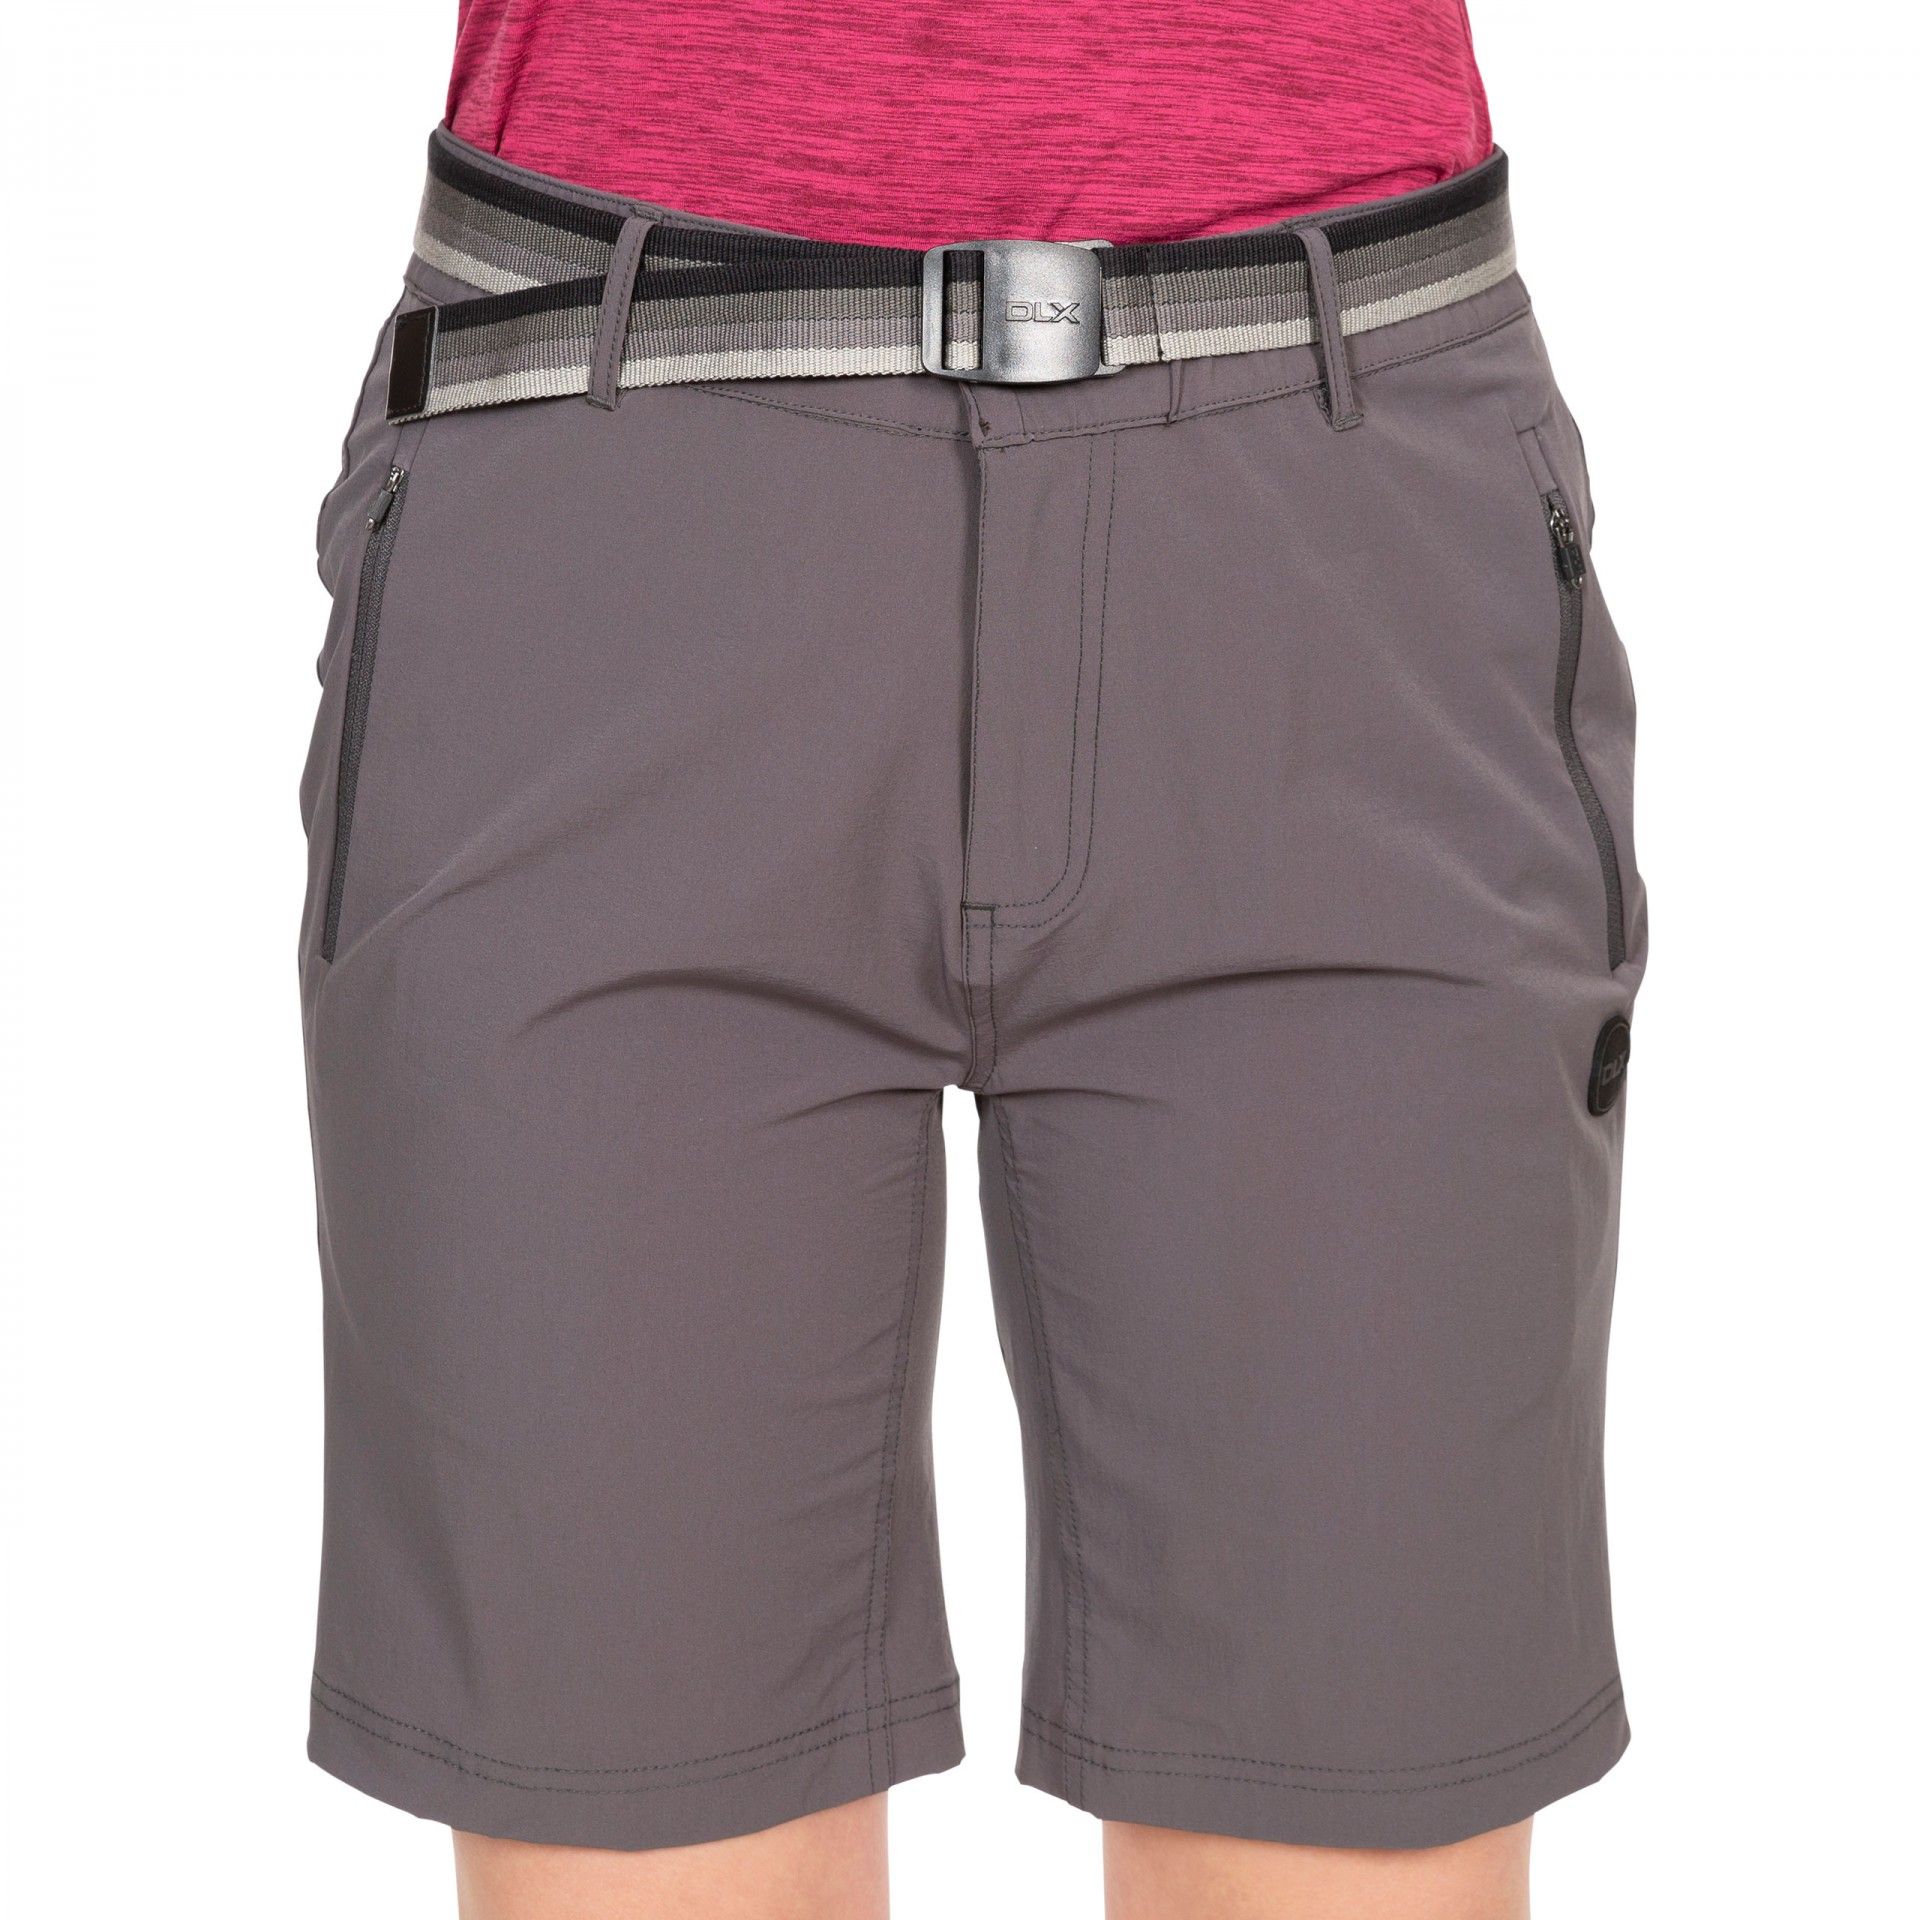 85% Polyamide, 15% Elastane. Elasticated waistband with button fastening. Front zipped fly opening. 2 zipped pockets at front. Detachable stripe webbing belt. DLX stretch. Trespass Womens Waist Sizing (approx): XS/8 - 25in/66cm, S/10 - 28in/71cm, M/12 - 30in/76cm, L/14 - 32in/81cm, XL/16 - 34in/86cm, XXL/18 - 36in/91.5cm.